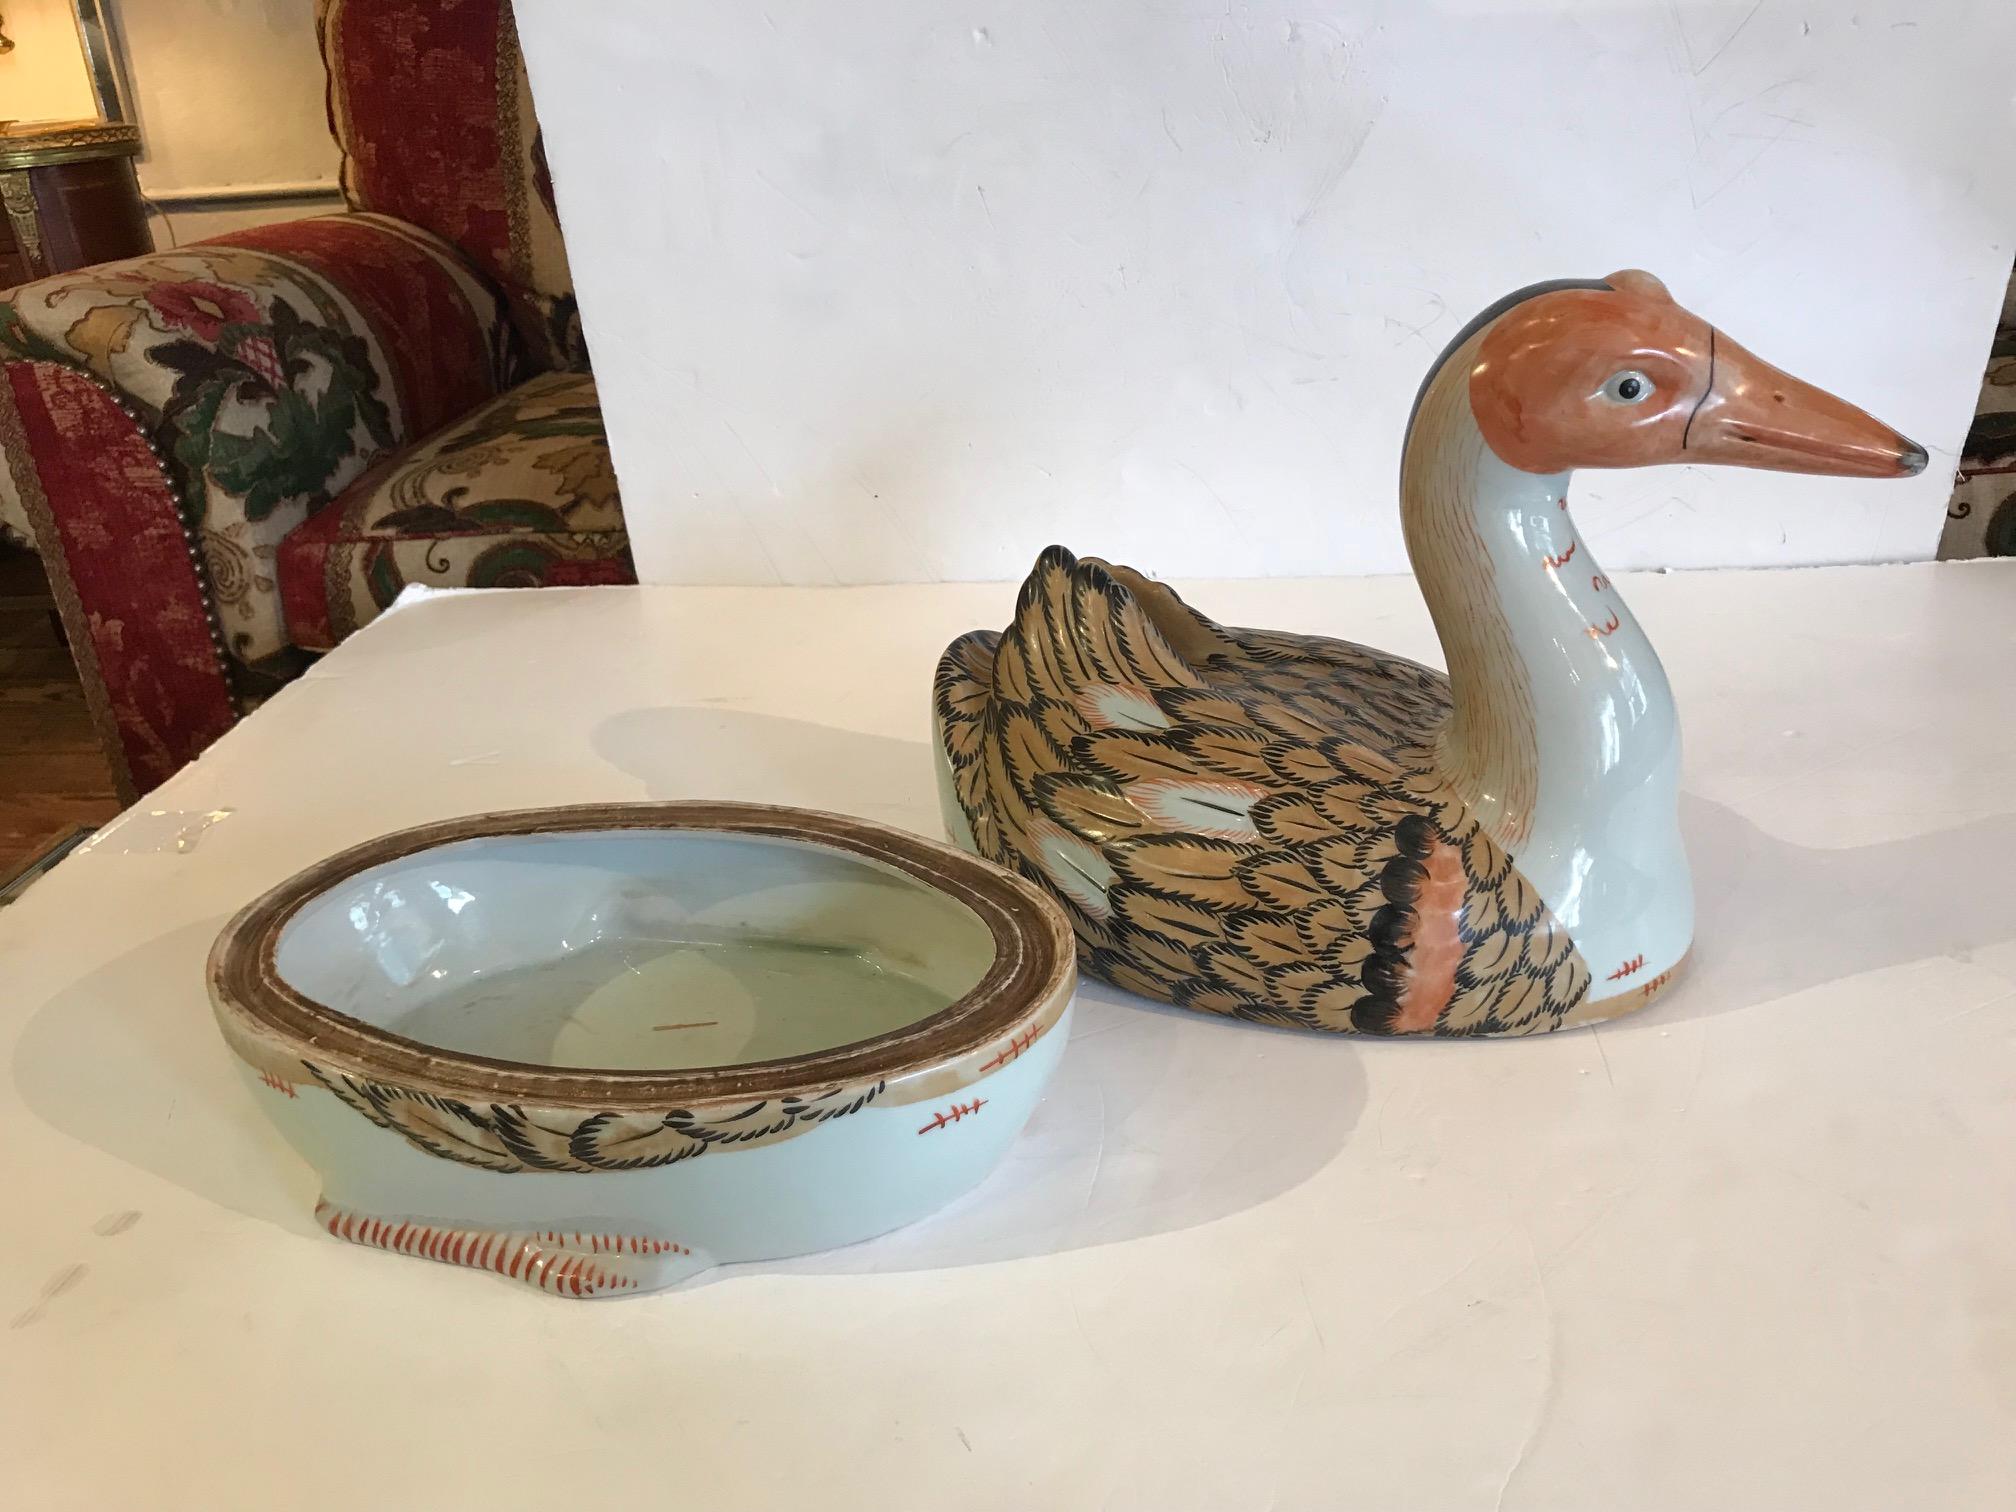 Wonderful Chinese tureen or shallow bowl with duck shaped top, hand-painted and charming from beak to tail feathers.
Stamp on bottom but undecipherable.
 
 